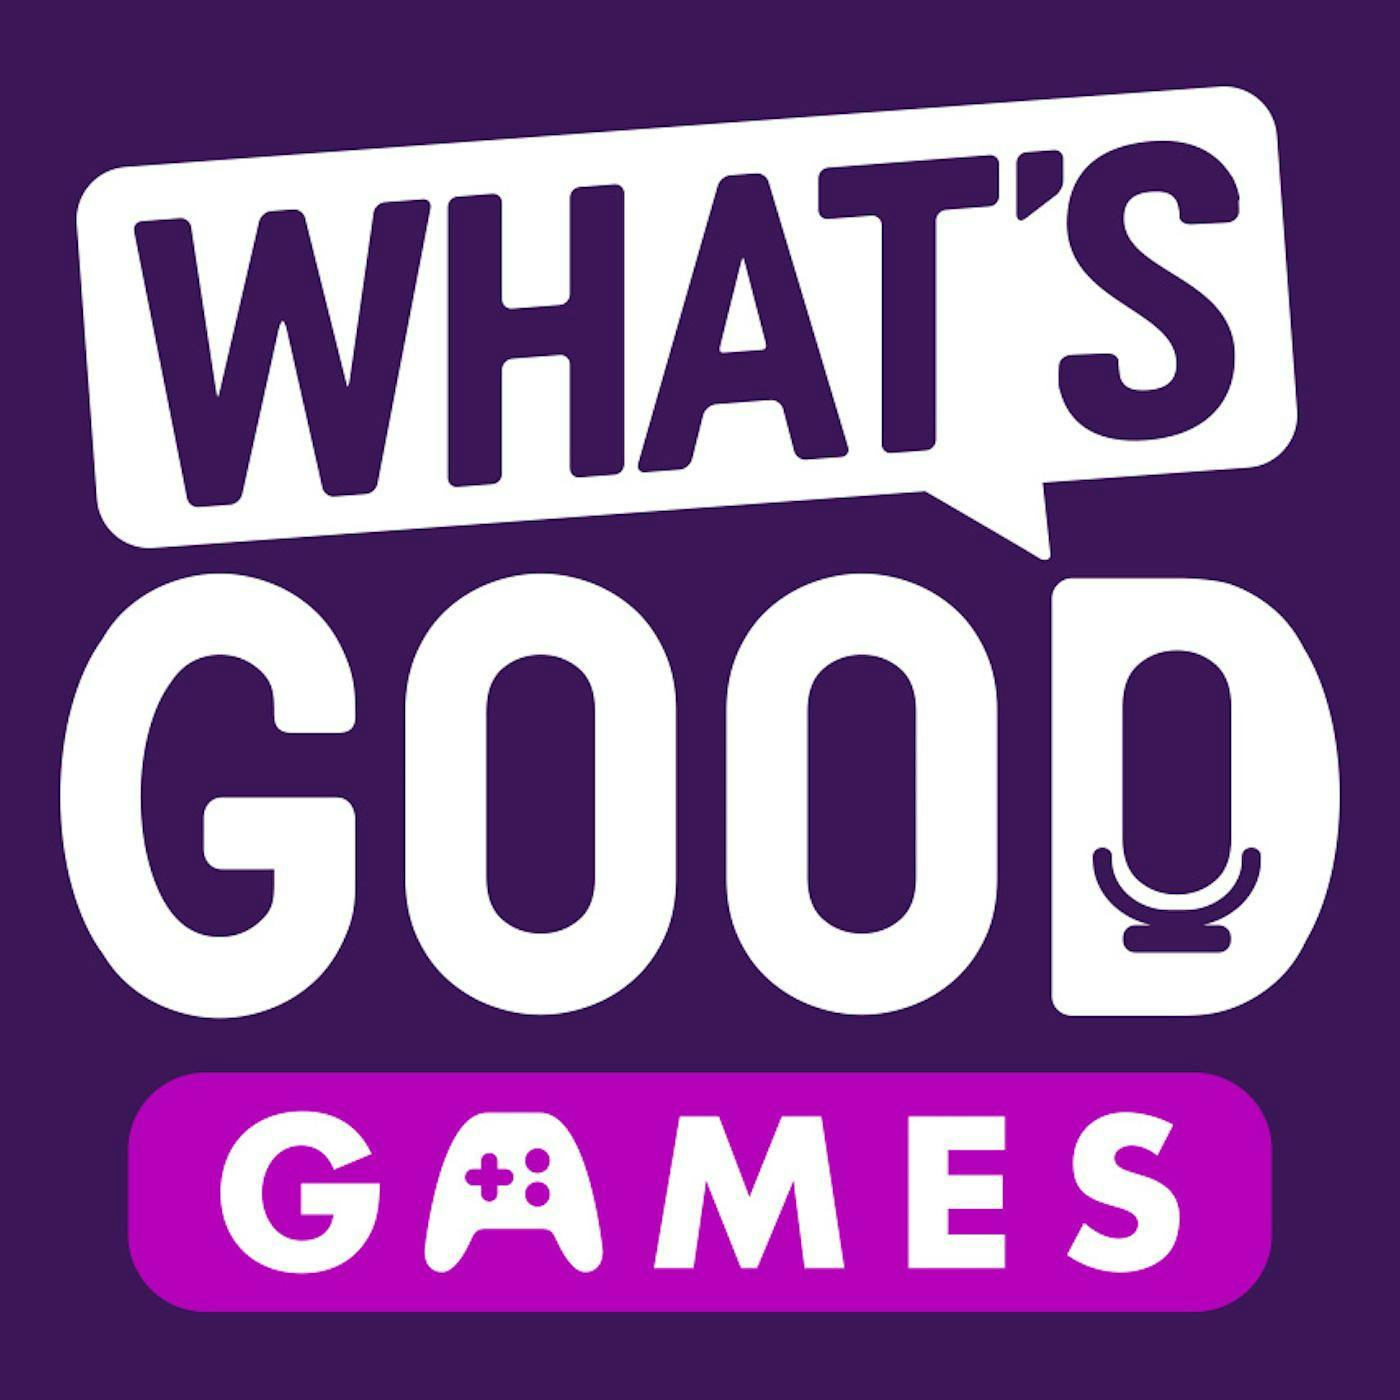 Black Friday, Sony Leaves E3, and No N64 Classic - What's Good Games (Ep. 80)